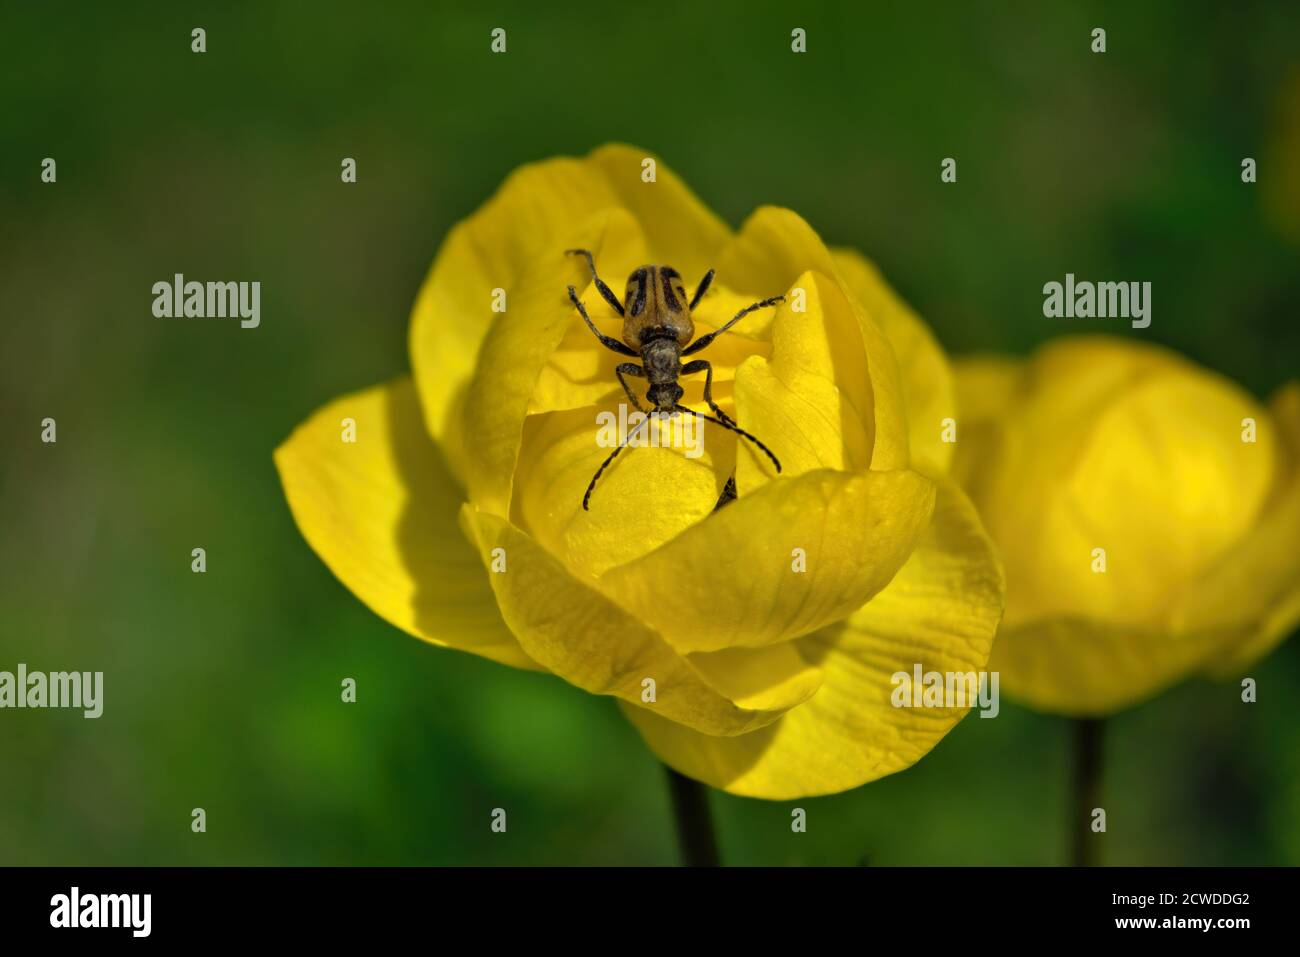 Beetle on a bright yellow Trollius flower. Spring flowers on a blurred background. The globeflower. Yellow flowers Trollius or globeflower. Stock Photo